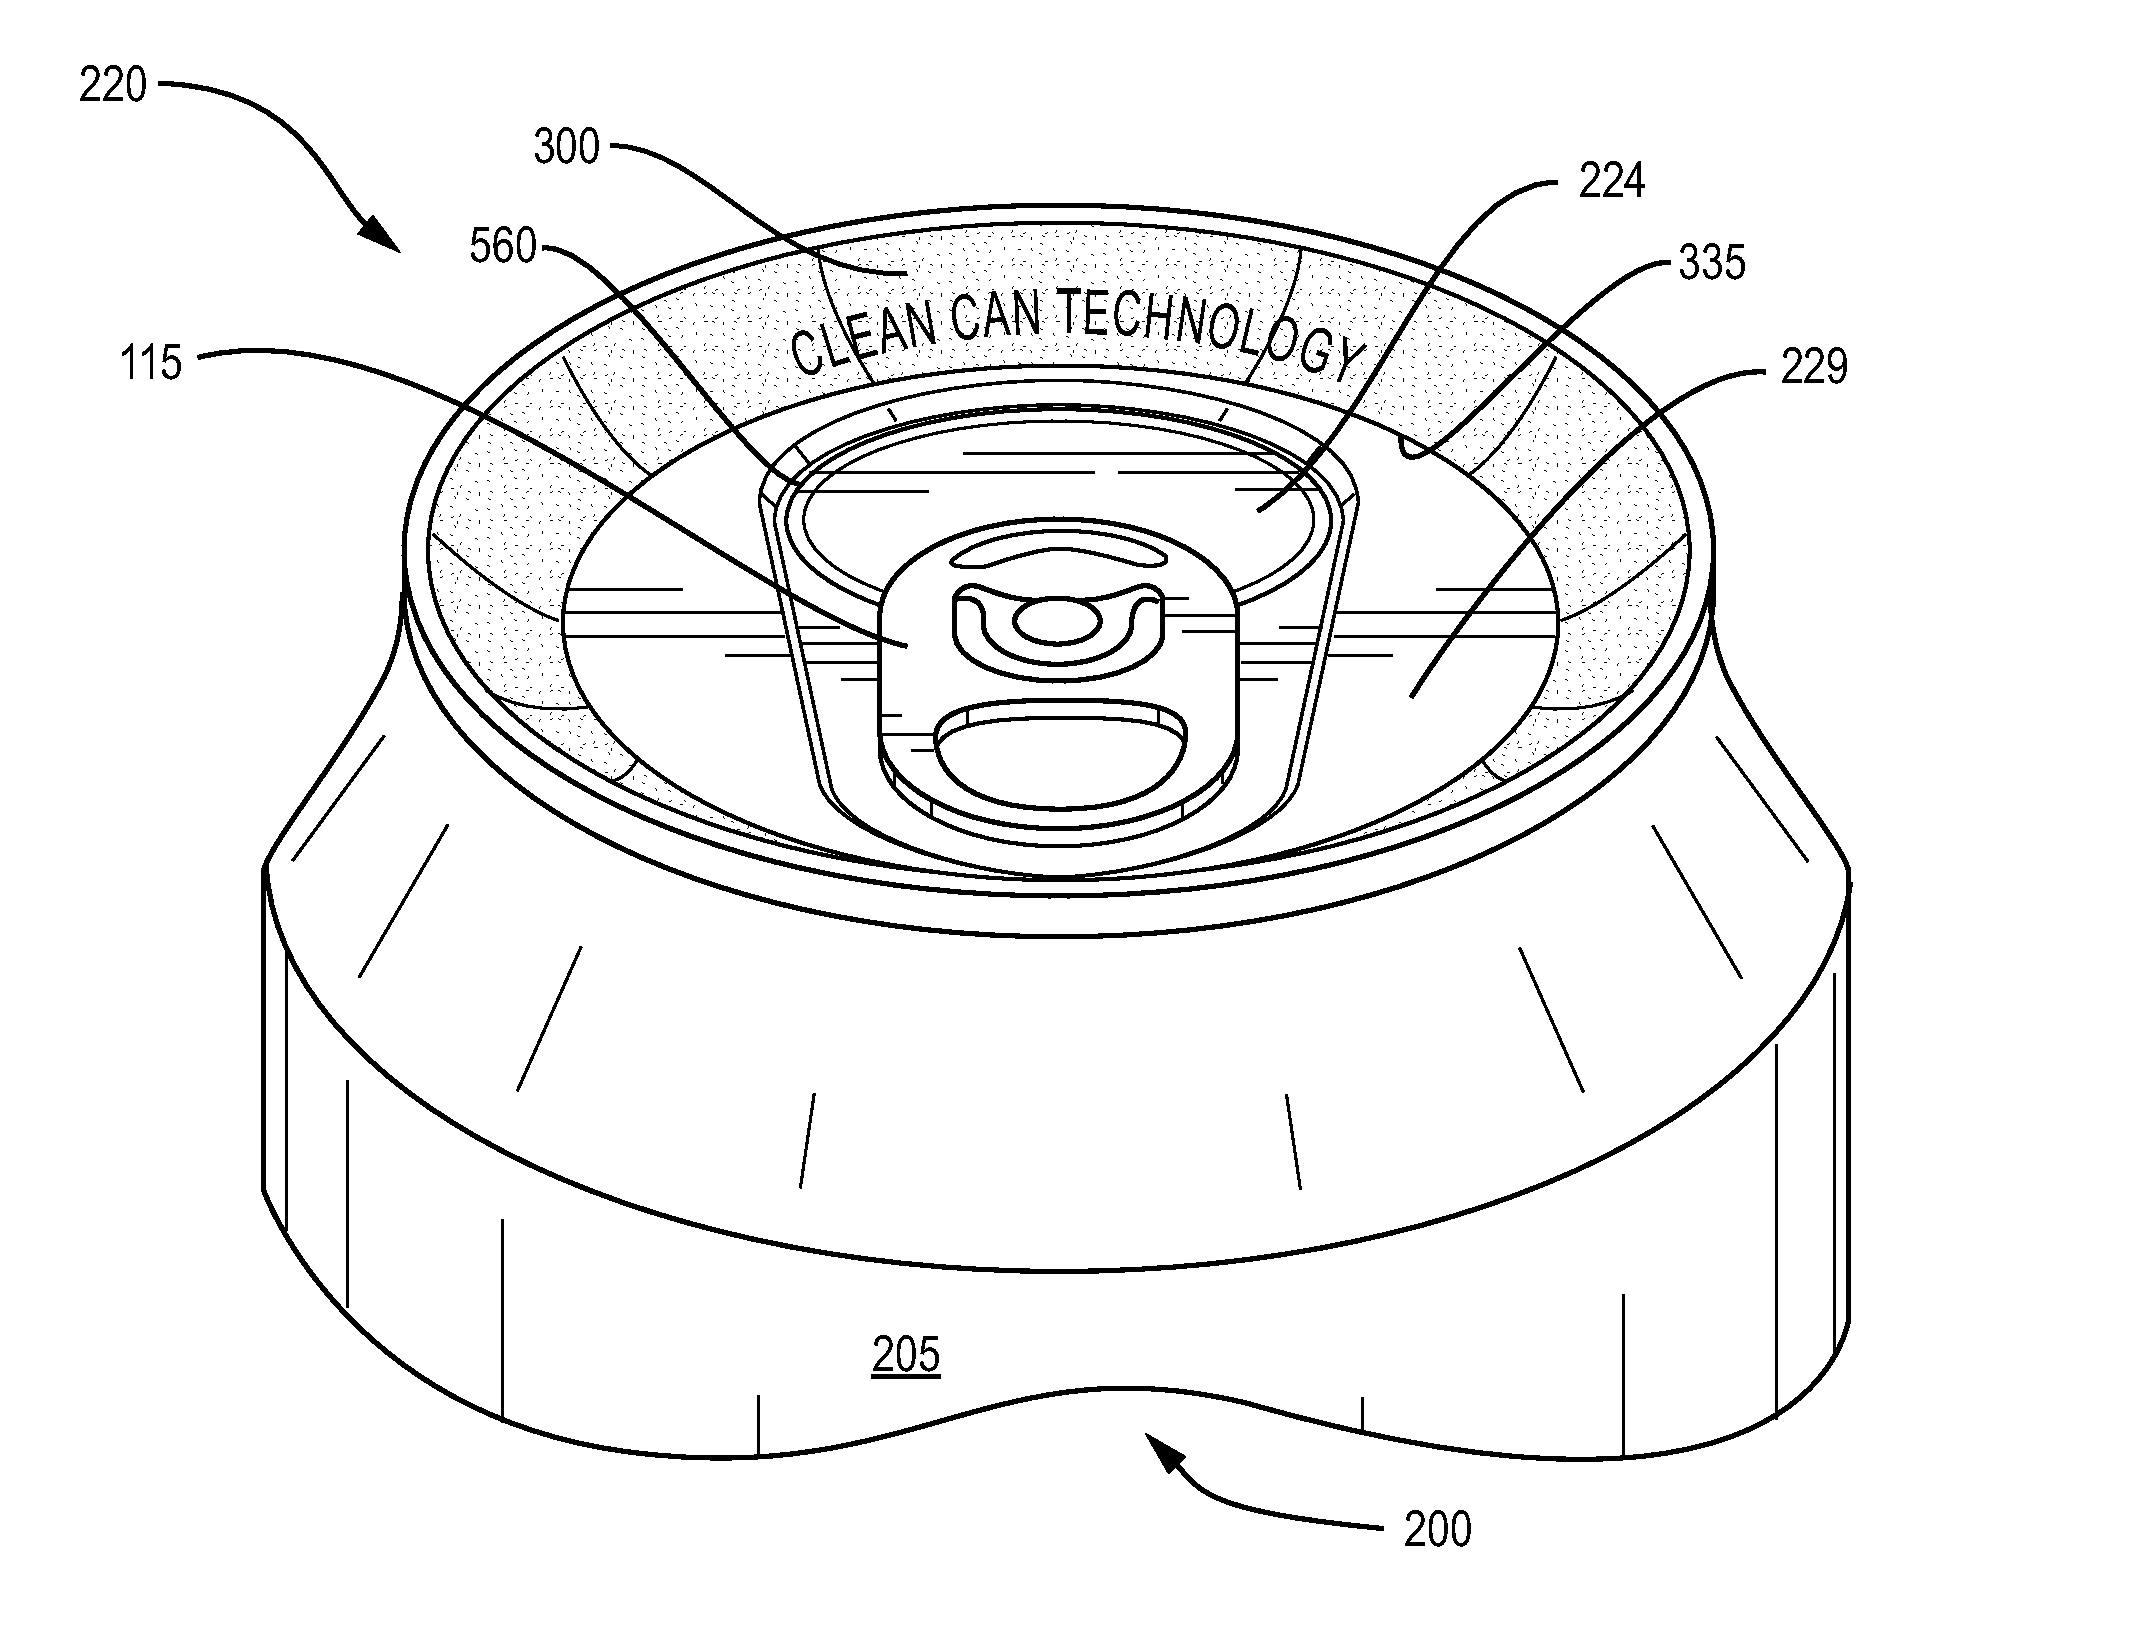 Beverage can marketing device